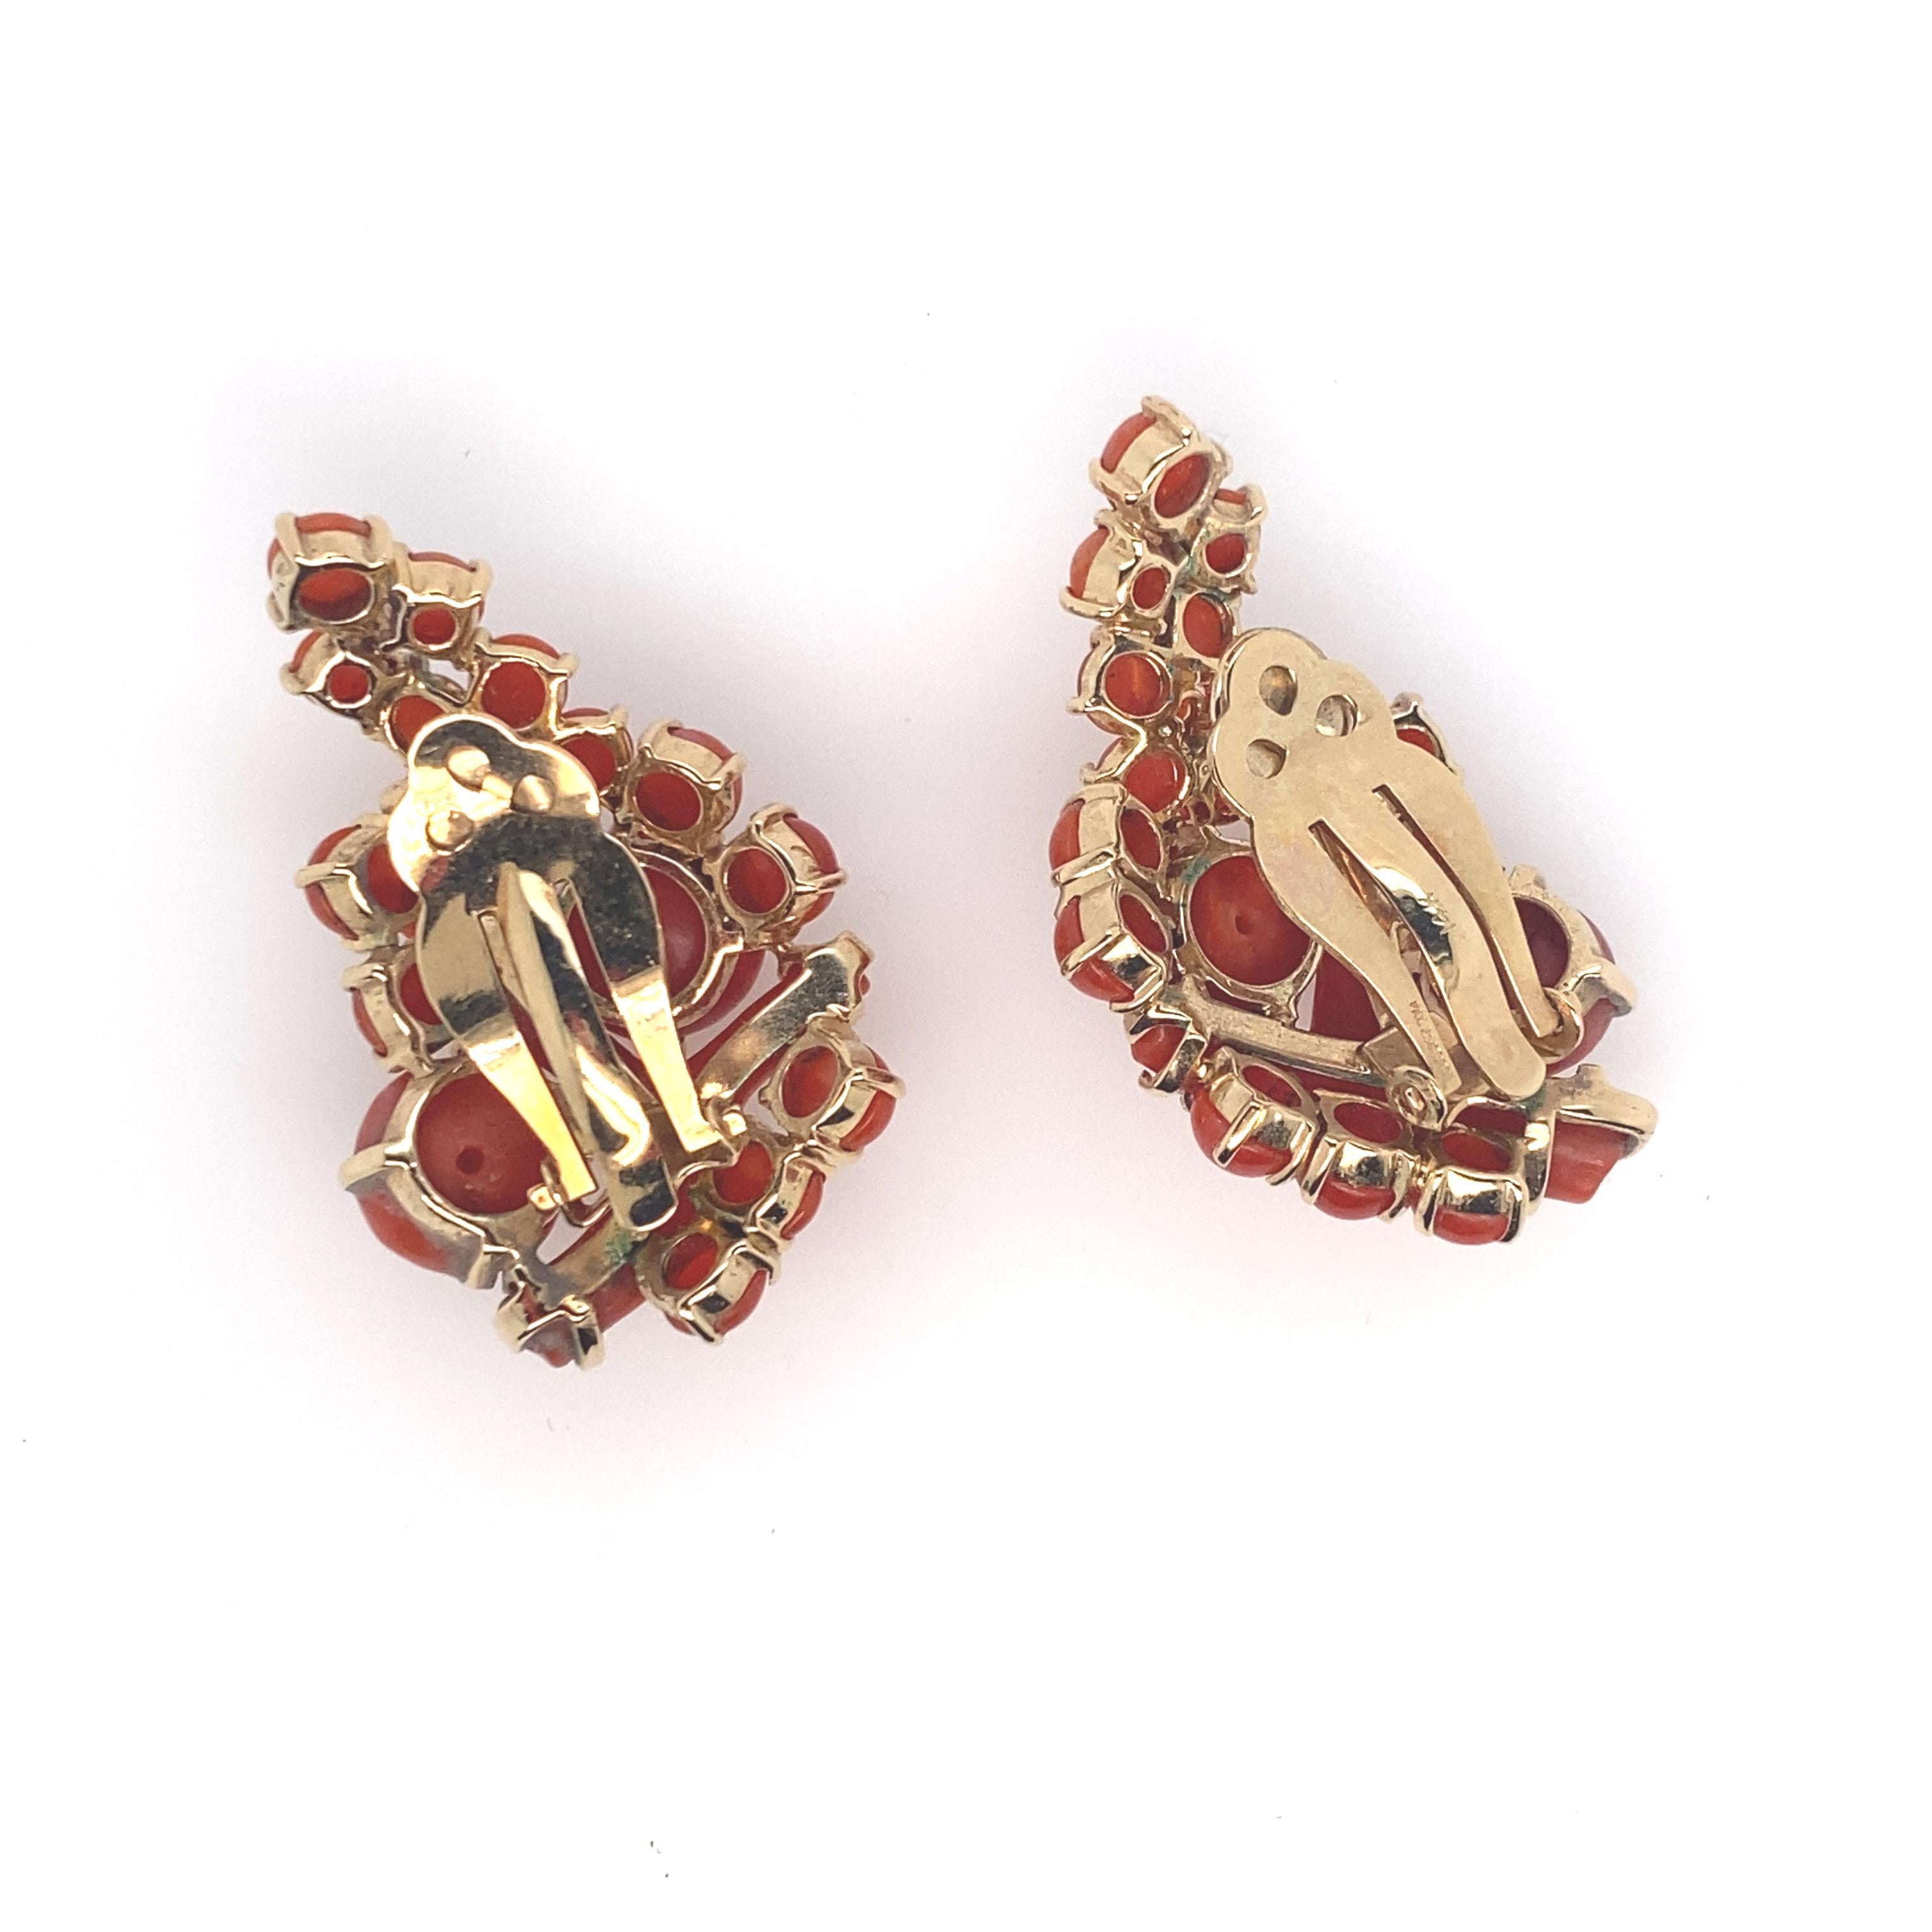 One-of-a-kind Vintage Red Coral earrings from Italy.  Circa 1950's.  Featuring two beautiful, free form coral branch earrings, also set with  round red coral cabachons.  Truly statement pieces.  See the other pieces in the set in my listings.  These